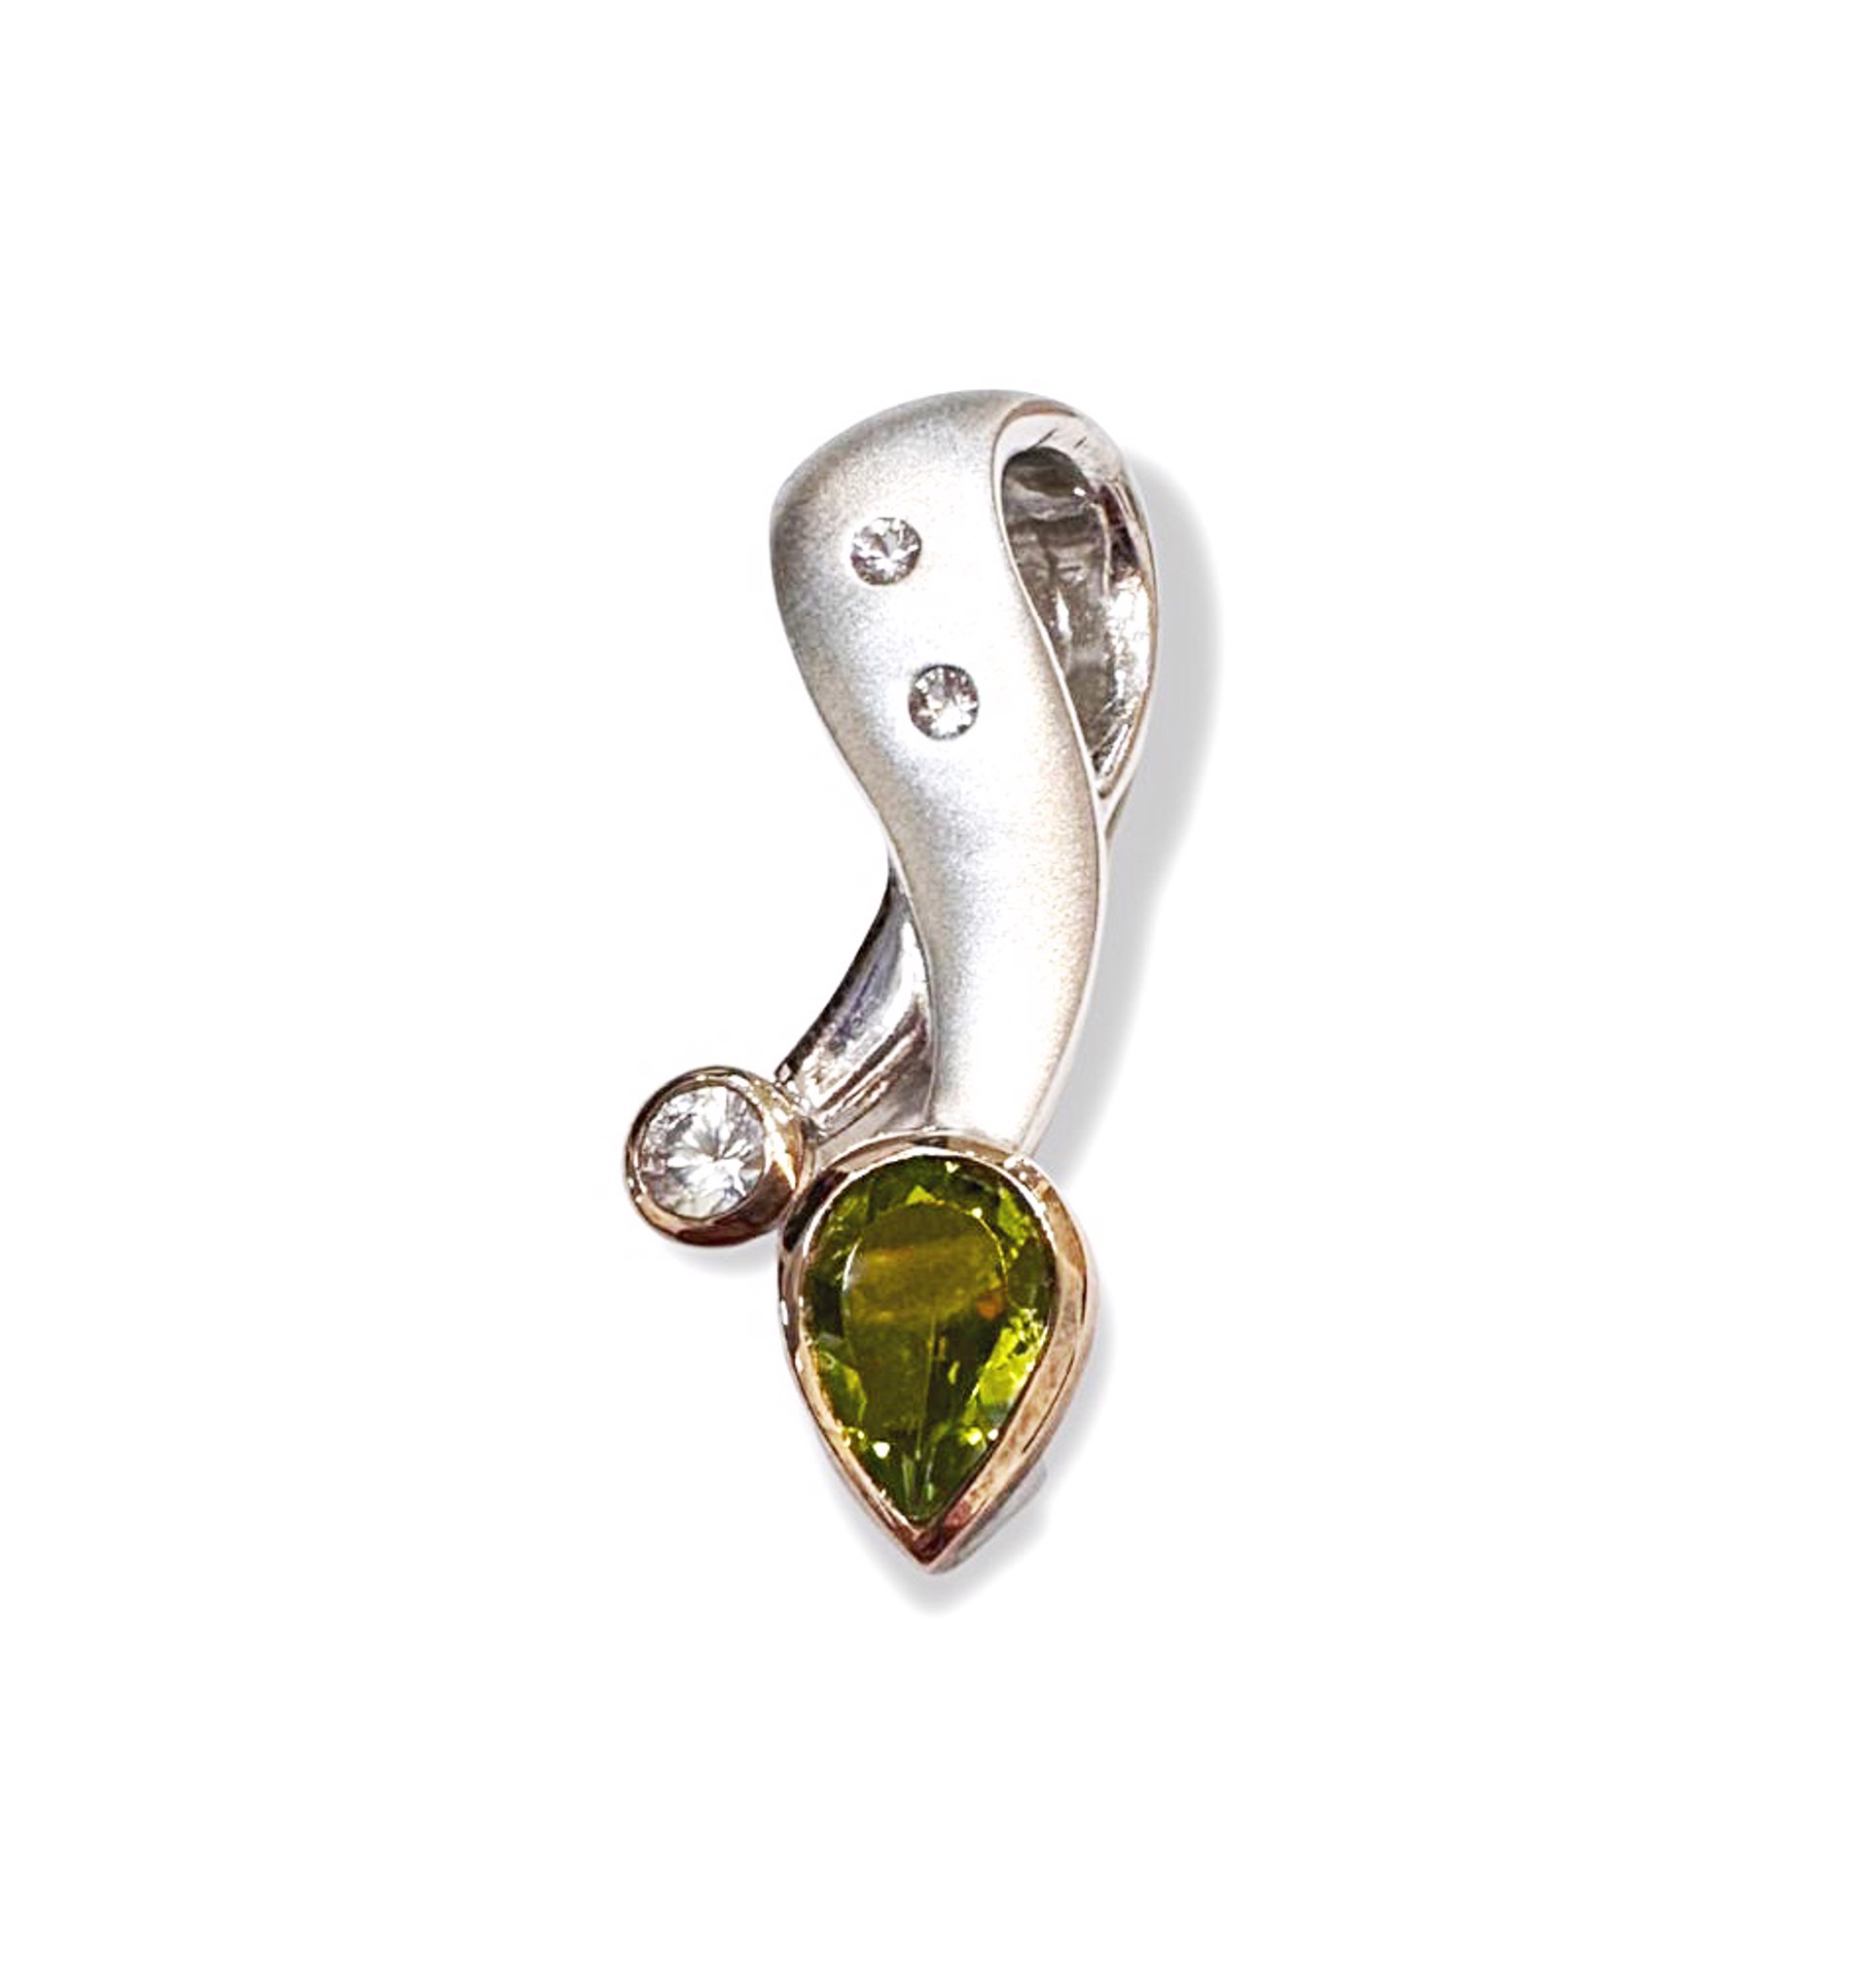 Pendant - Peridot and White Topaz in Sterling Silver and 14kt Gold Surround by Joryel Vera